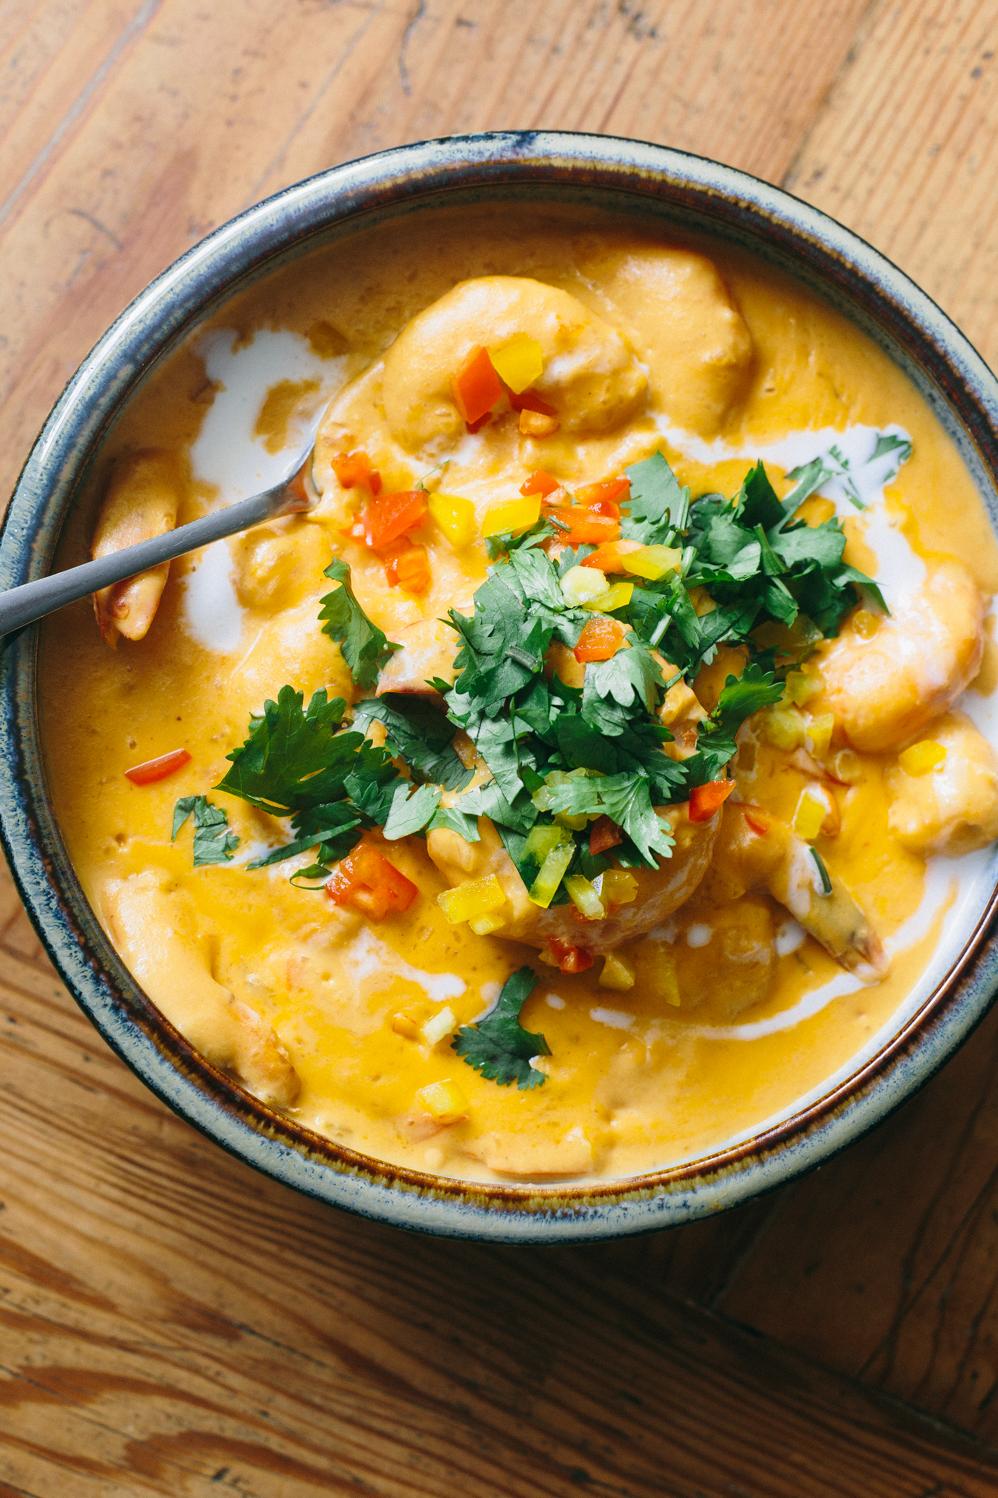  Get transported to Brazil with this flavorful and comforting dish. 🌴🍲